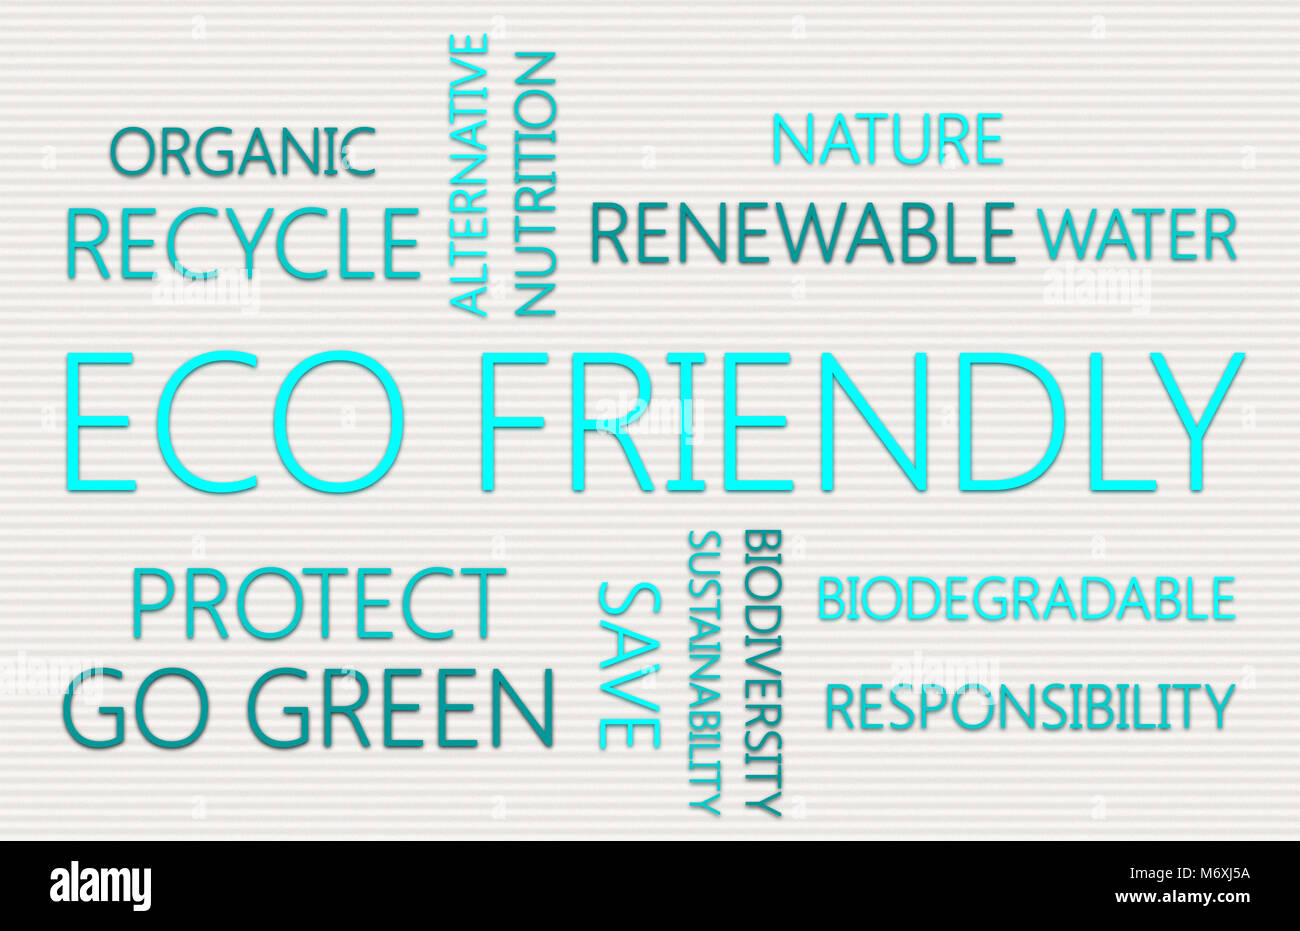 ECO FRIENDLY. Word cloud concept on light background with green letters Stock Photo